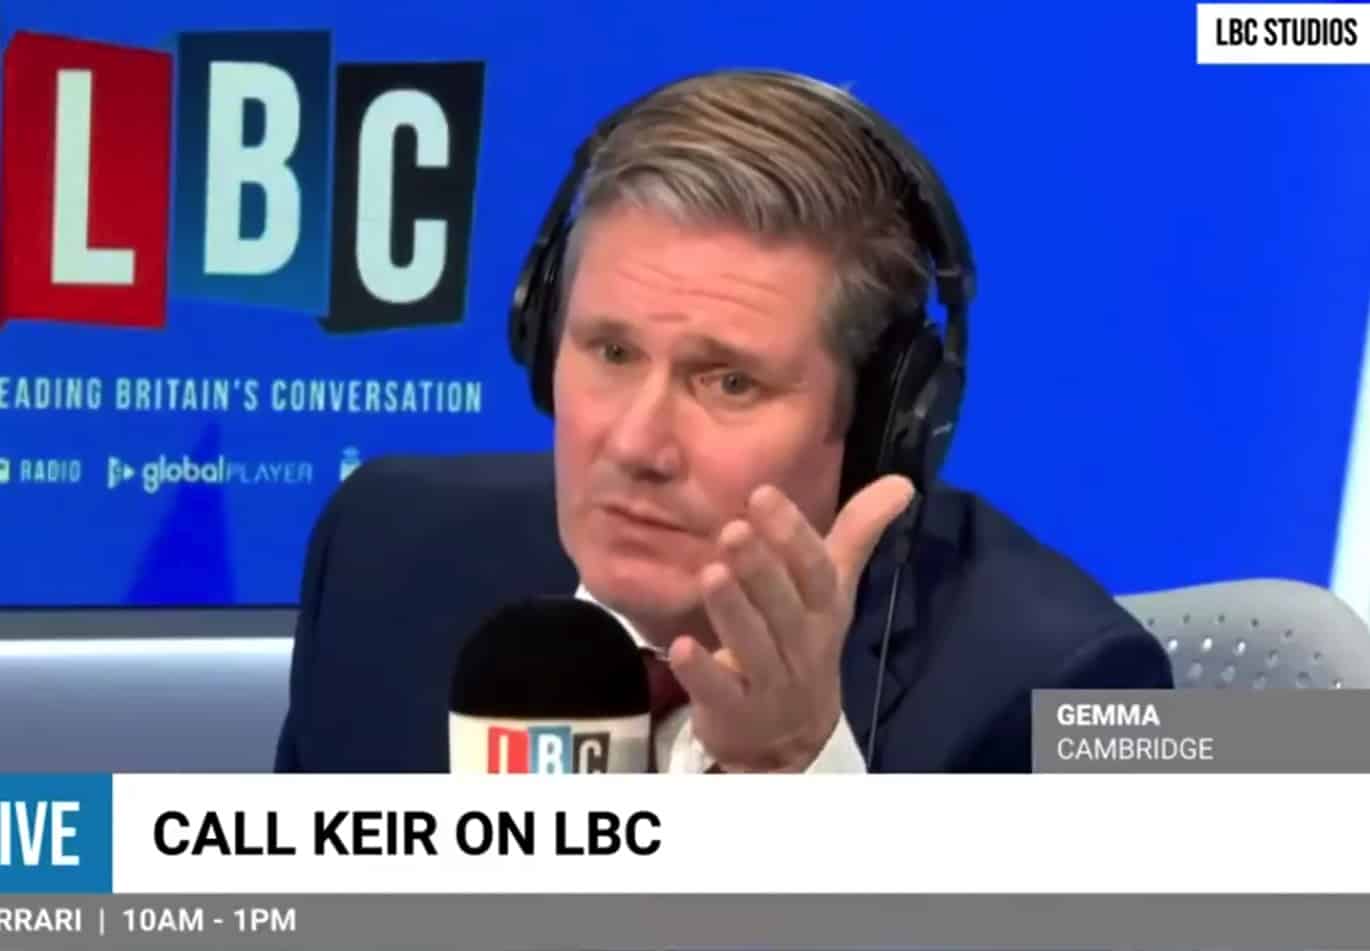 Keir Starmer criticised for not challenging “full-blown white supremacism” on national radio